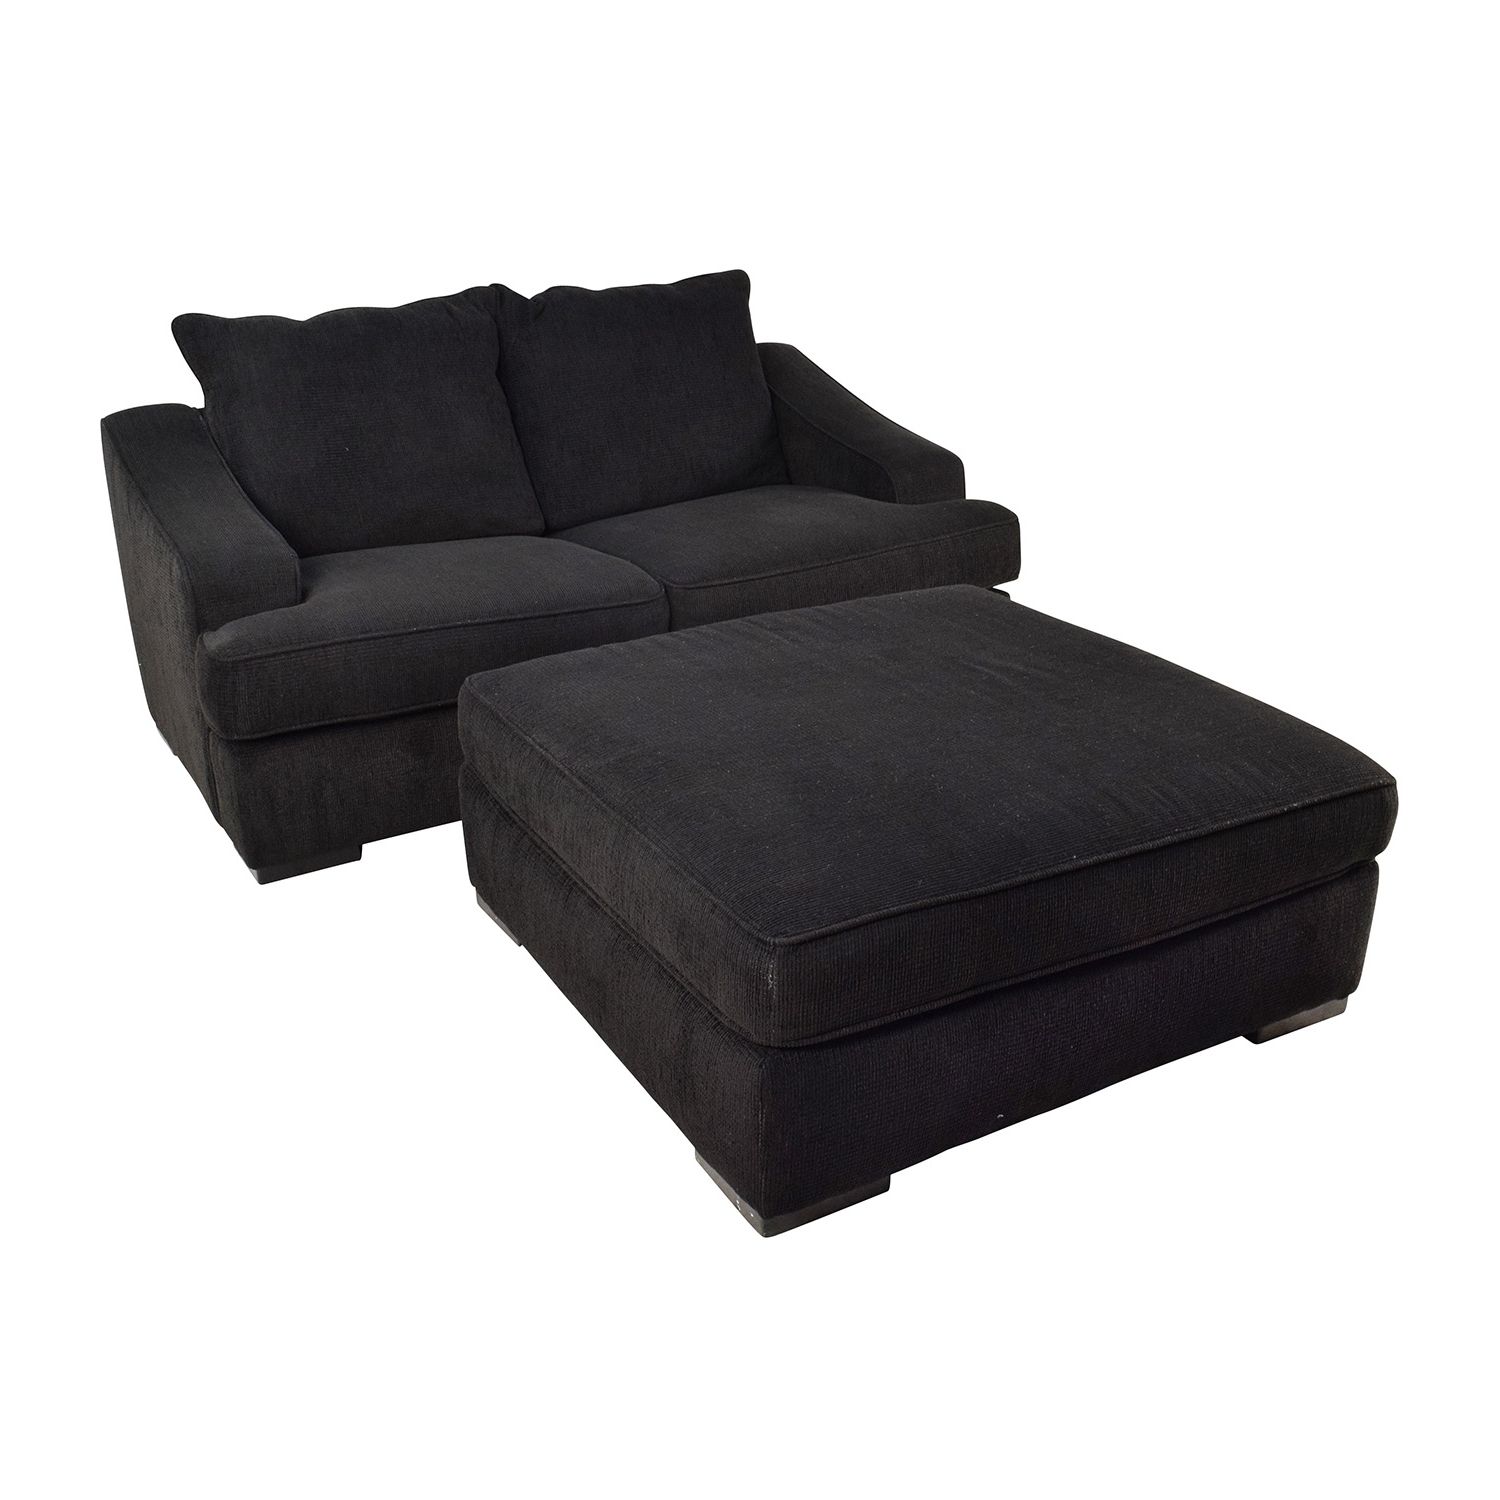 [%67% Off – Black Cloth Loveseat And Matching Oversized Ottoman / Sofas In Well Known Loveseats With Ottoman|loveseats With Ottoman Intended For 2018 67% Off – Black Cloth Loveseat And Matching Oversized Ottoman / Sofas|current Loveseats With Ottoman Pertaining To 67% Off – Black Cloth Loveseat And Matching Oversized Ottoman / Sofas|most Recently Released 67% Off – Black Cloth Loveseat And Matching Oversized Ottoman / Sofas Throughout Loveseats With Ottoman%] (View 3 of 20)